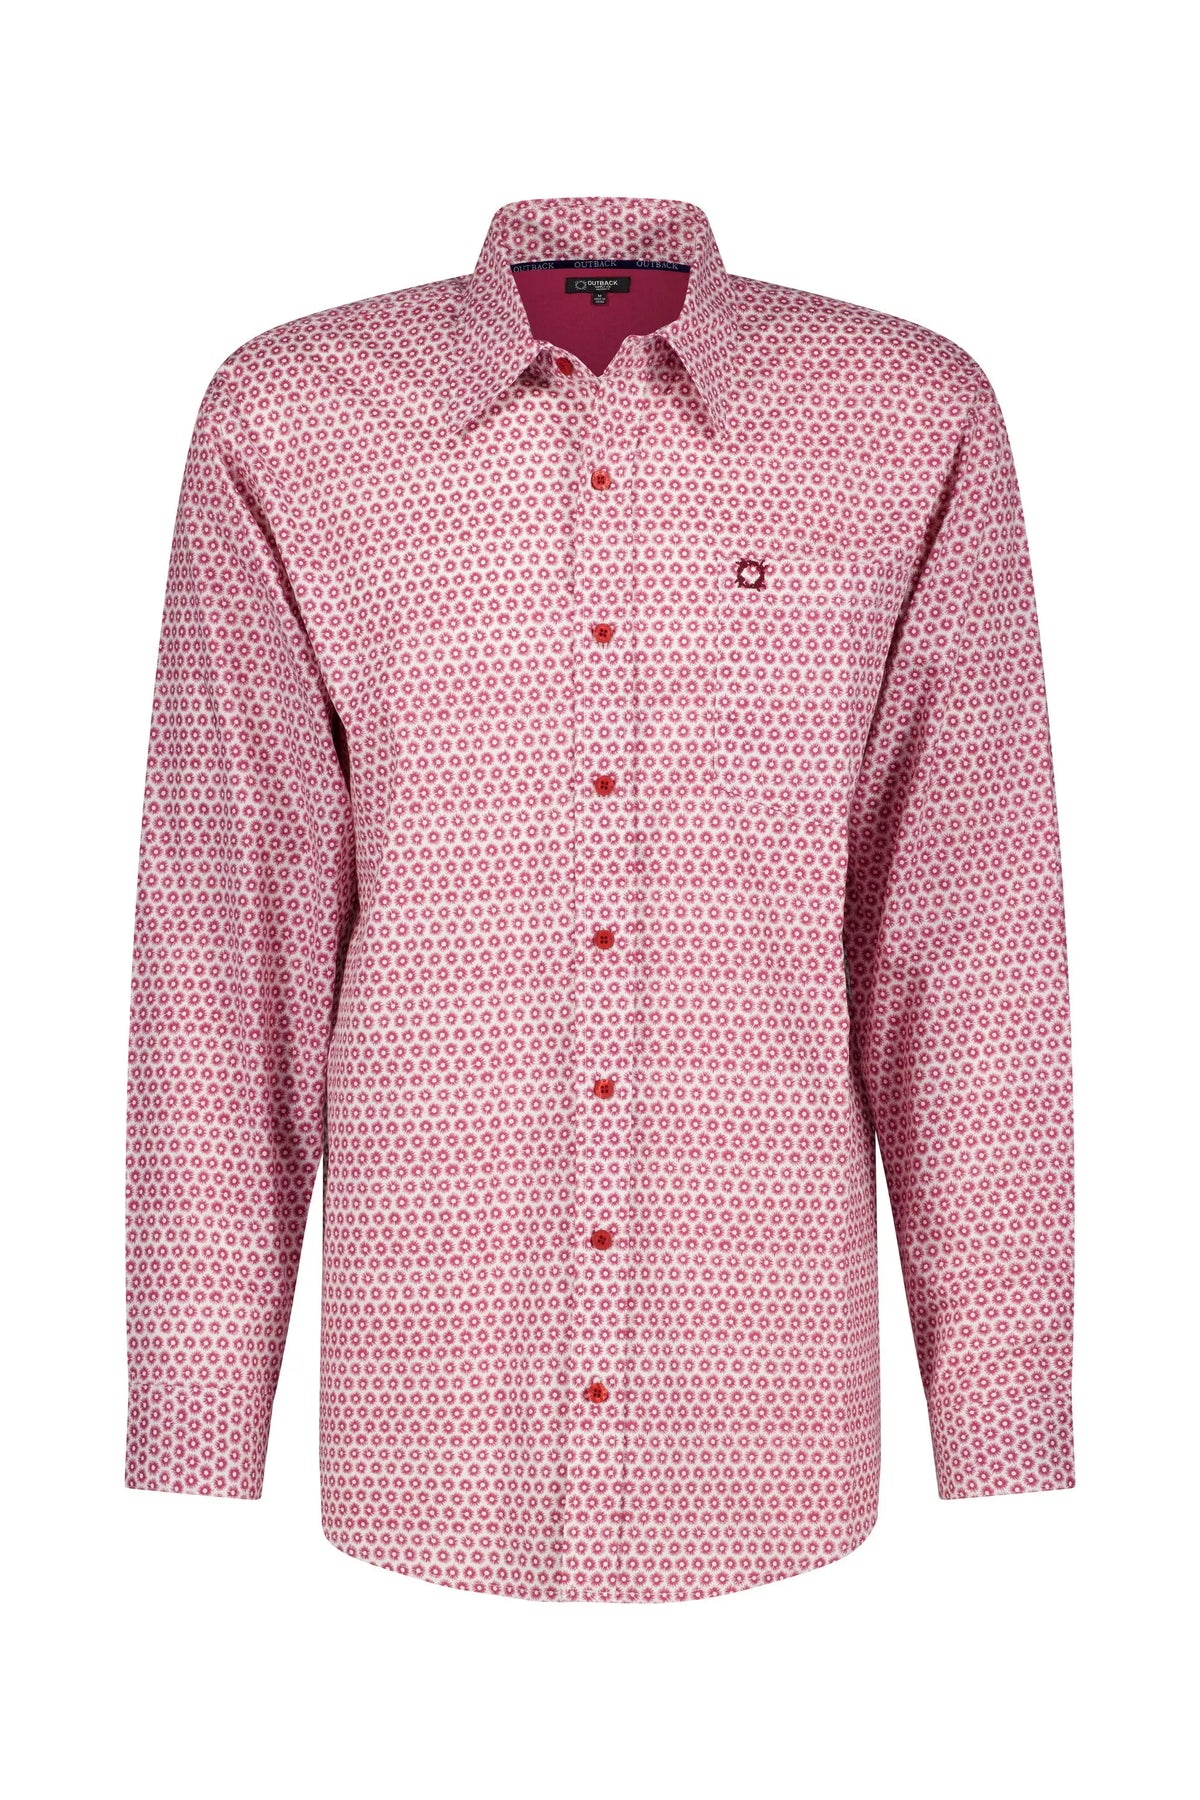 Reg Maroon Classic Cotton Shirt Outback Supply Co